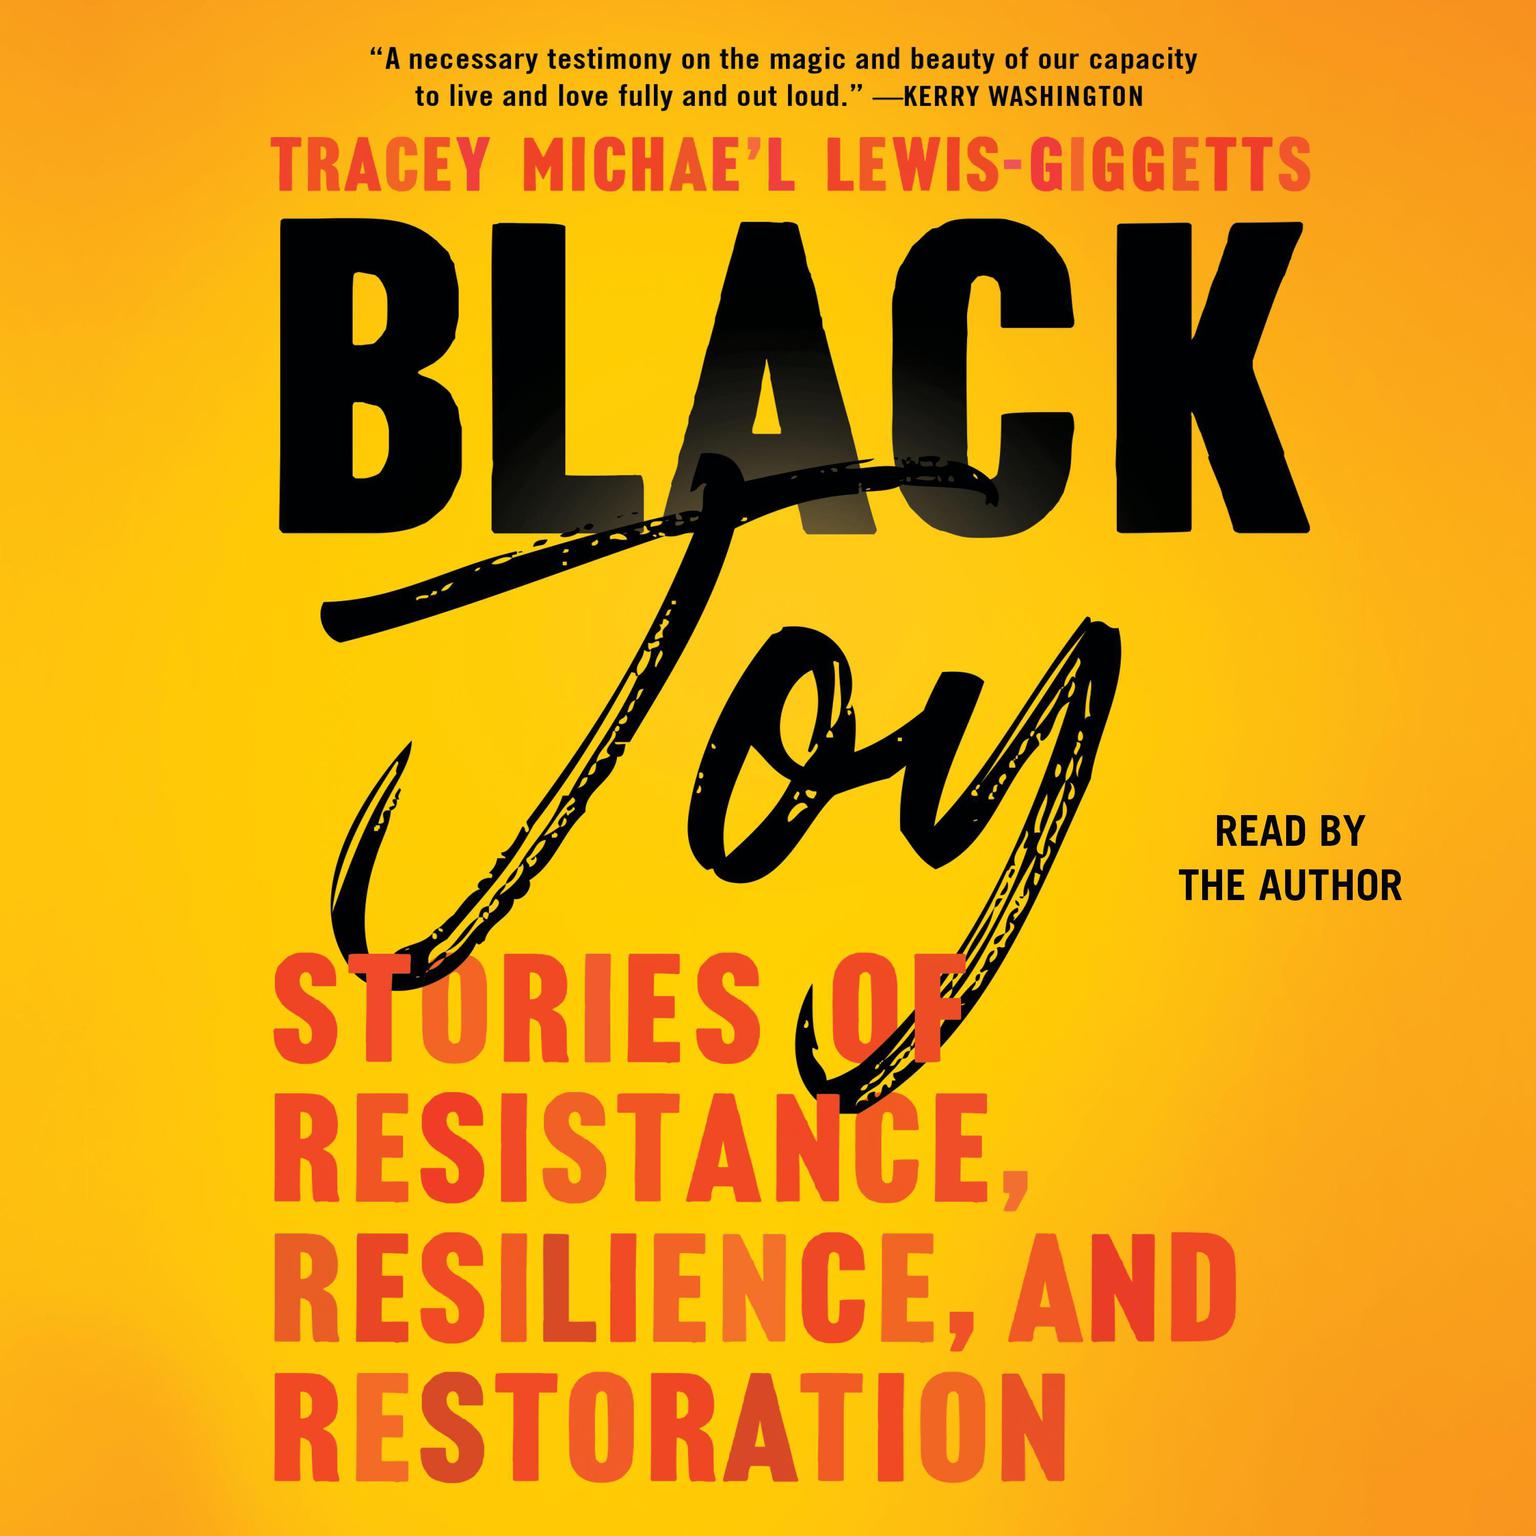 Black Joy: Stories of Resistance, Resilience, and Restoration Audiobook, by Tracey Michae’l Lewis-Giggetts